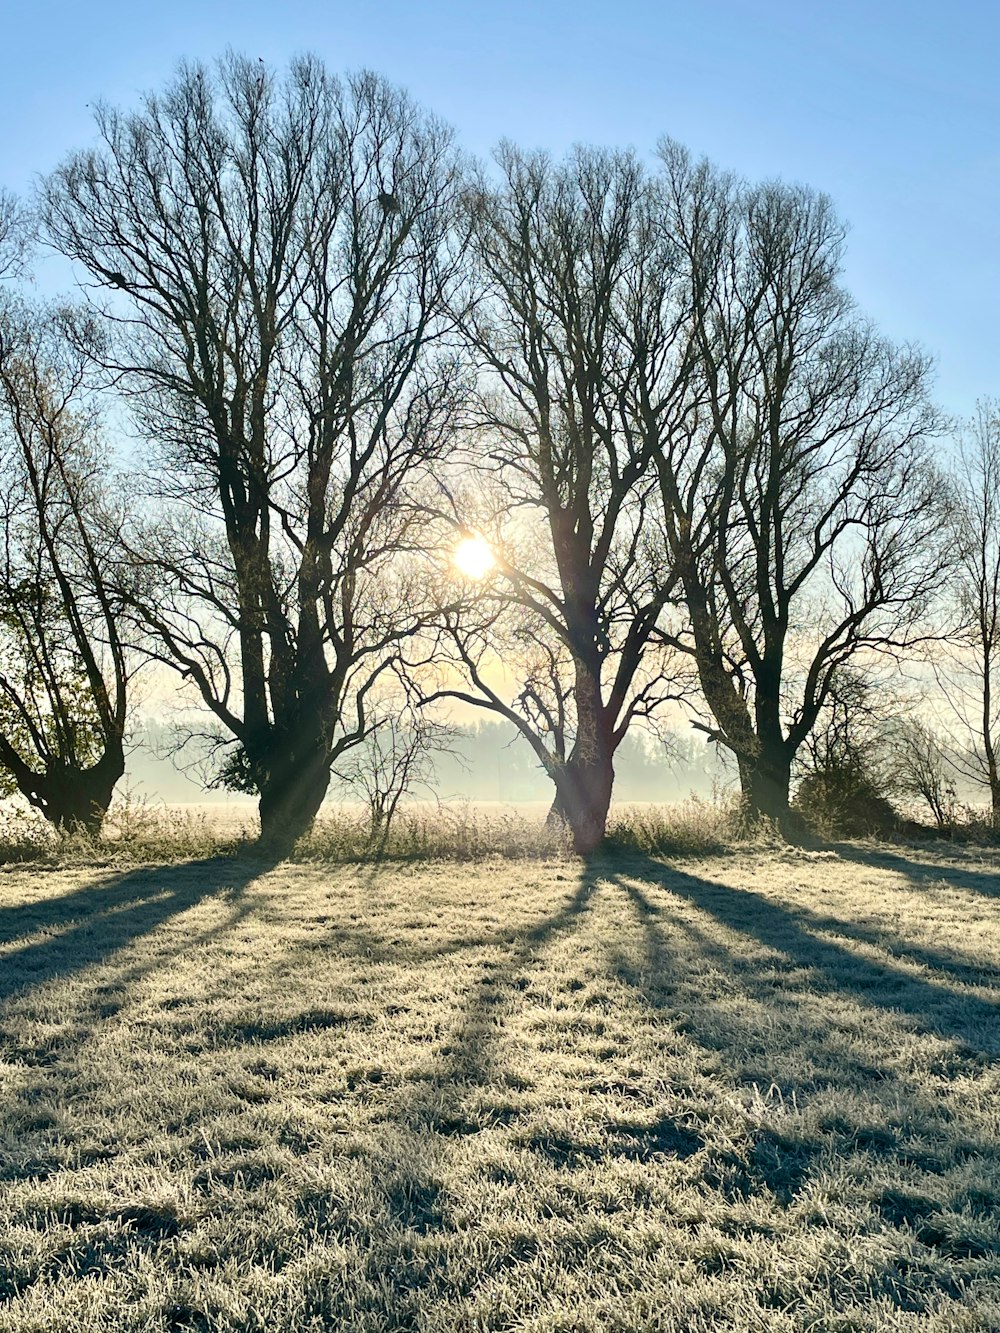 the sun shines through the trees on a frosty day